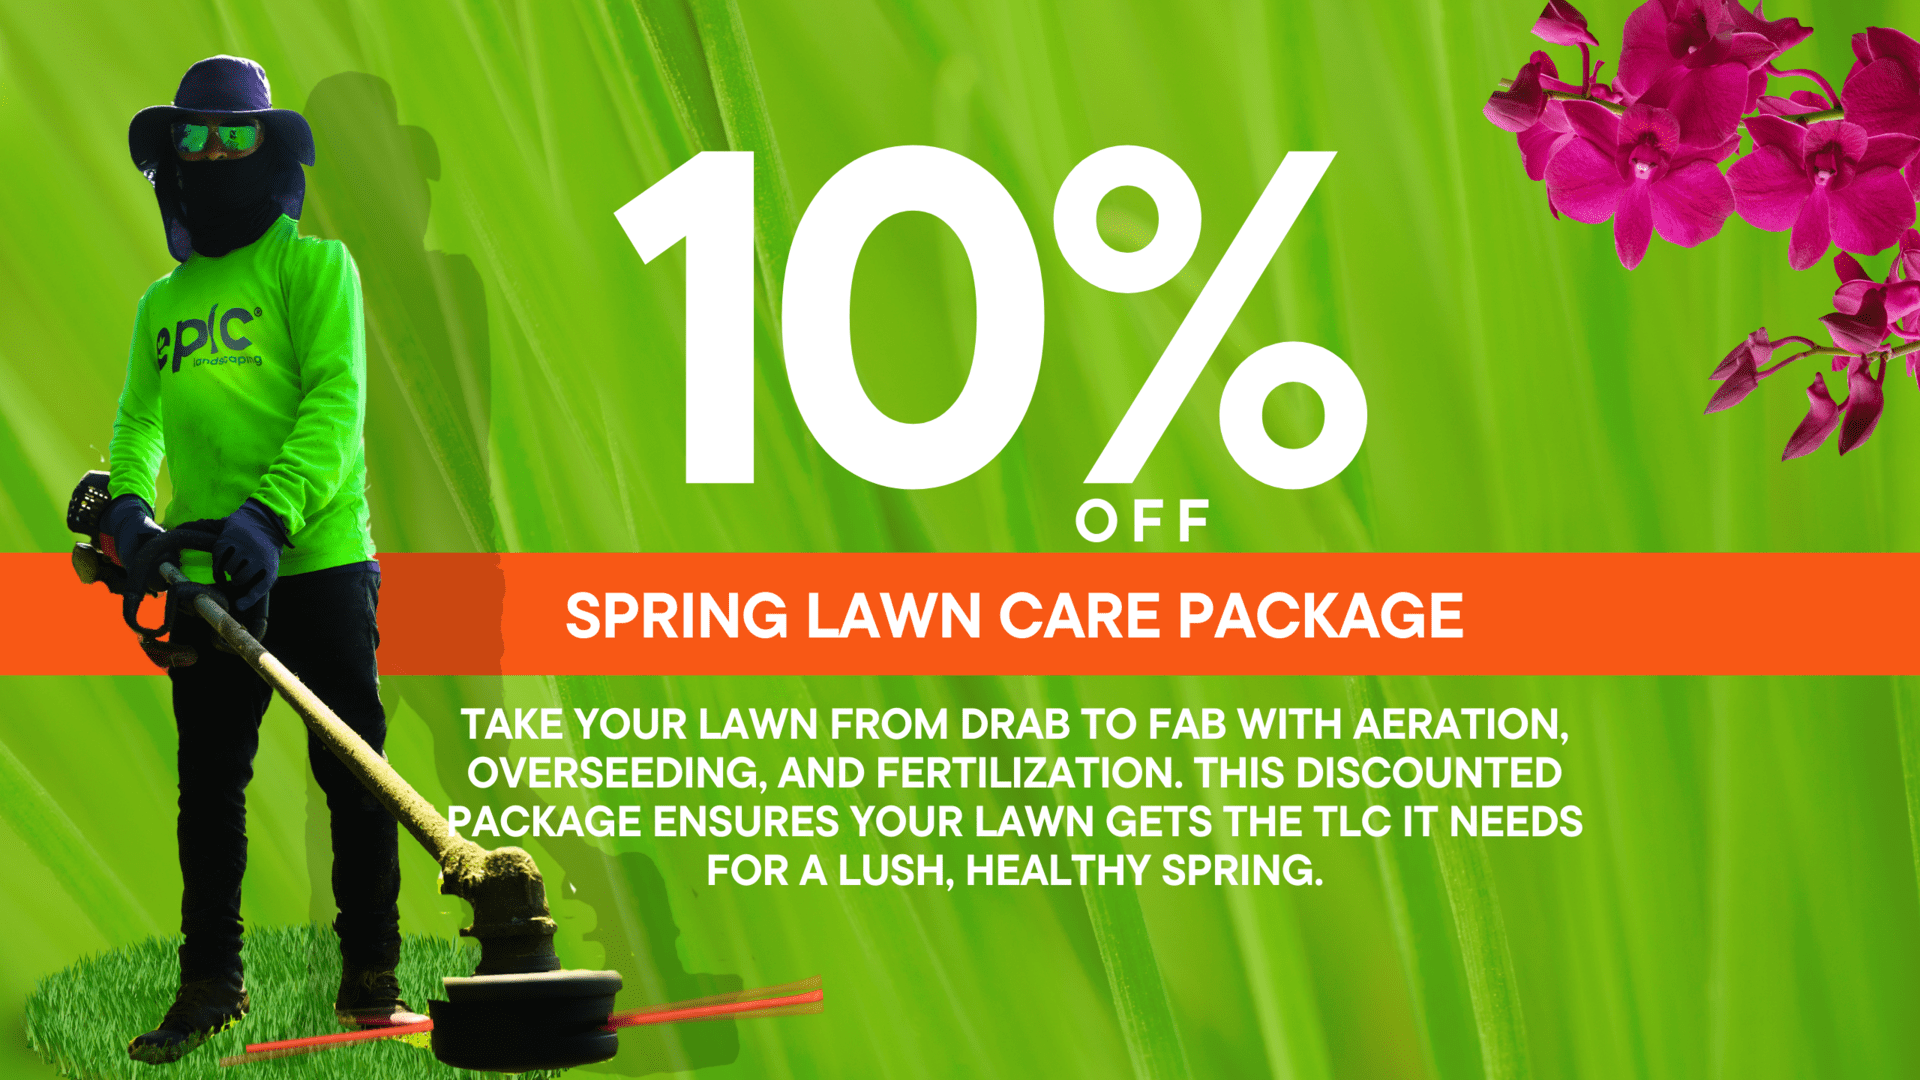 10% off spring lawn care package. Take your lawn from drab to fab with aeration, overseeding, and fertilization. This discounted package ensures your lawn gets the TLC it needs for a lush, healthy spring.